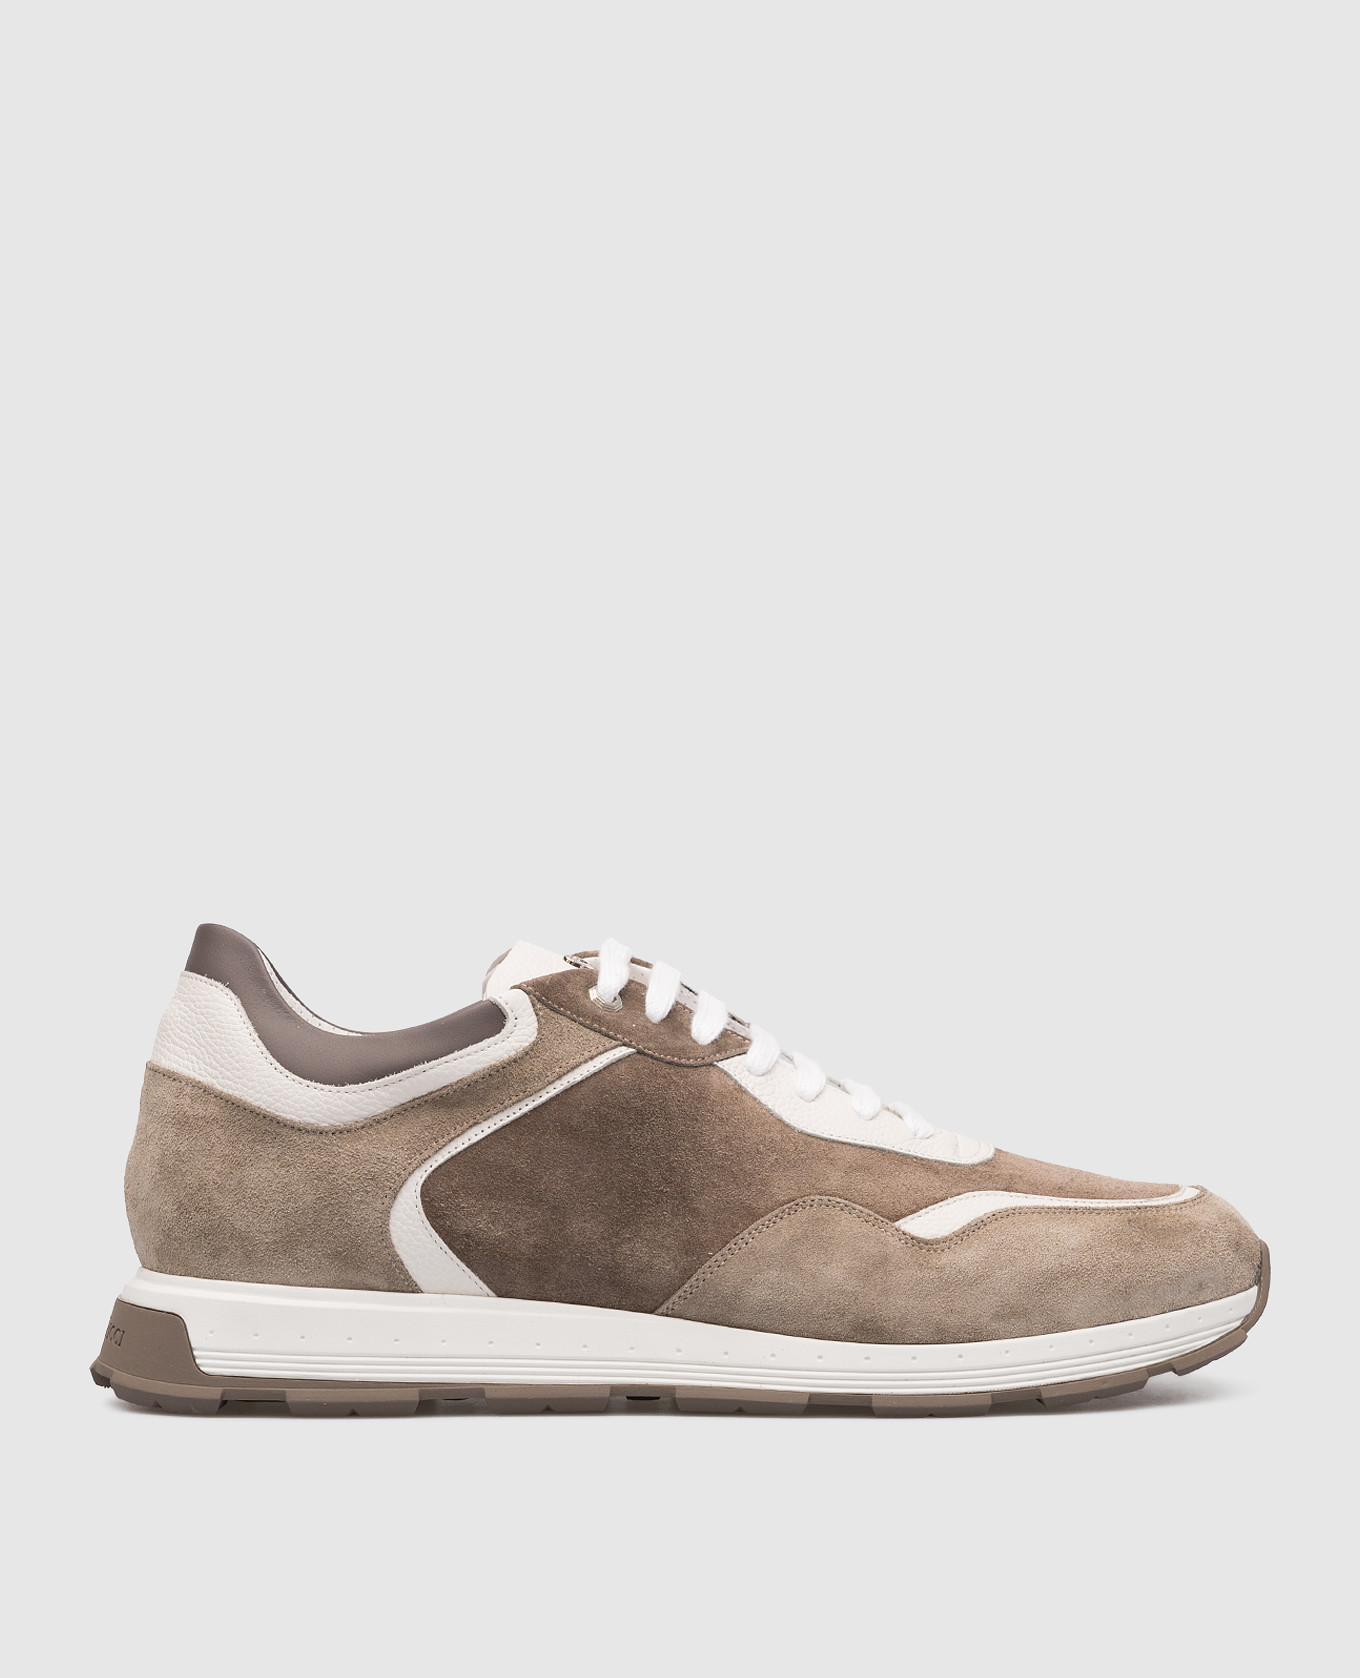 Brown suede sneakers with metallic logo